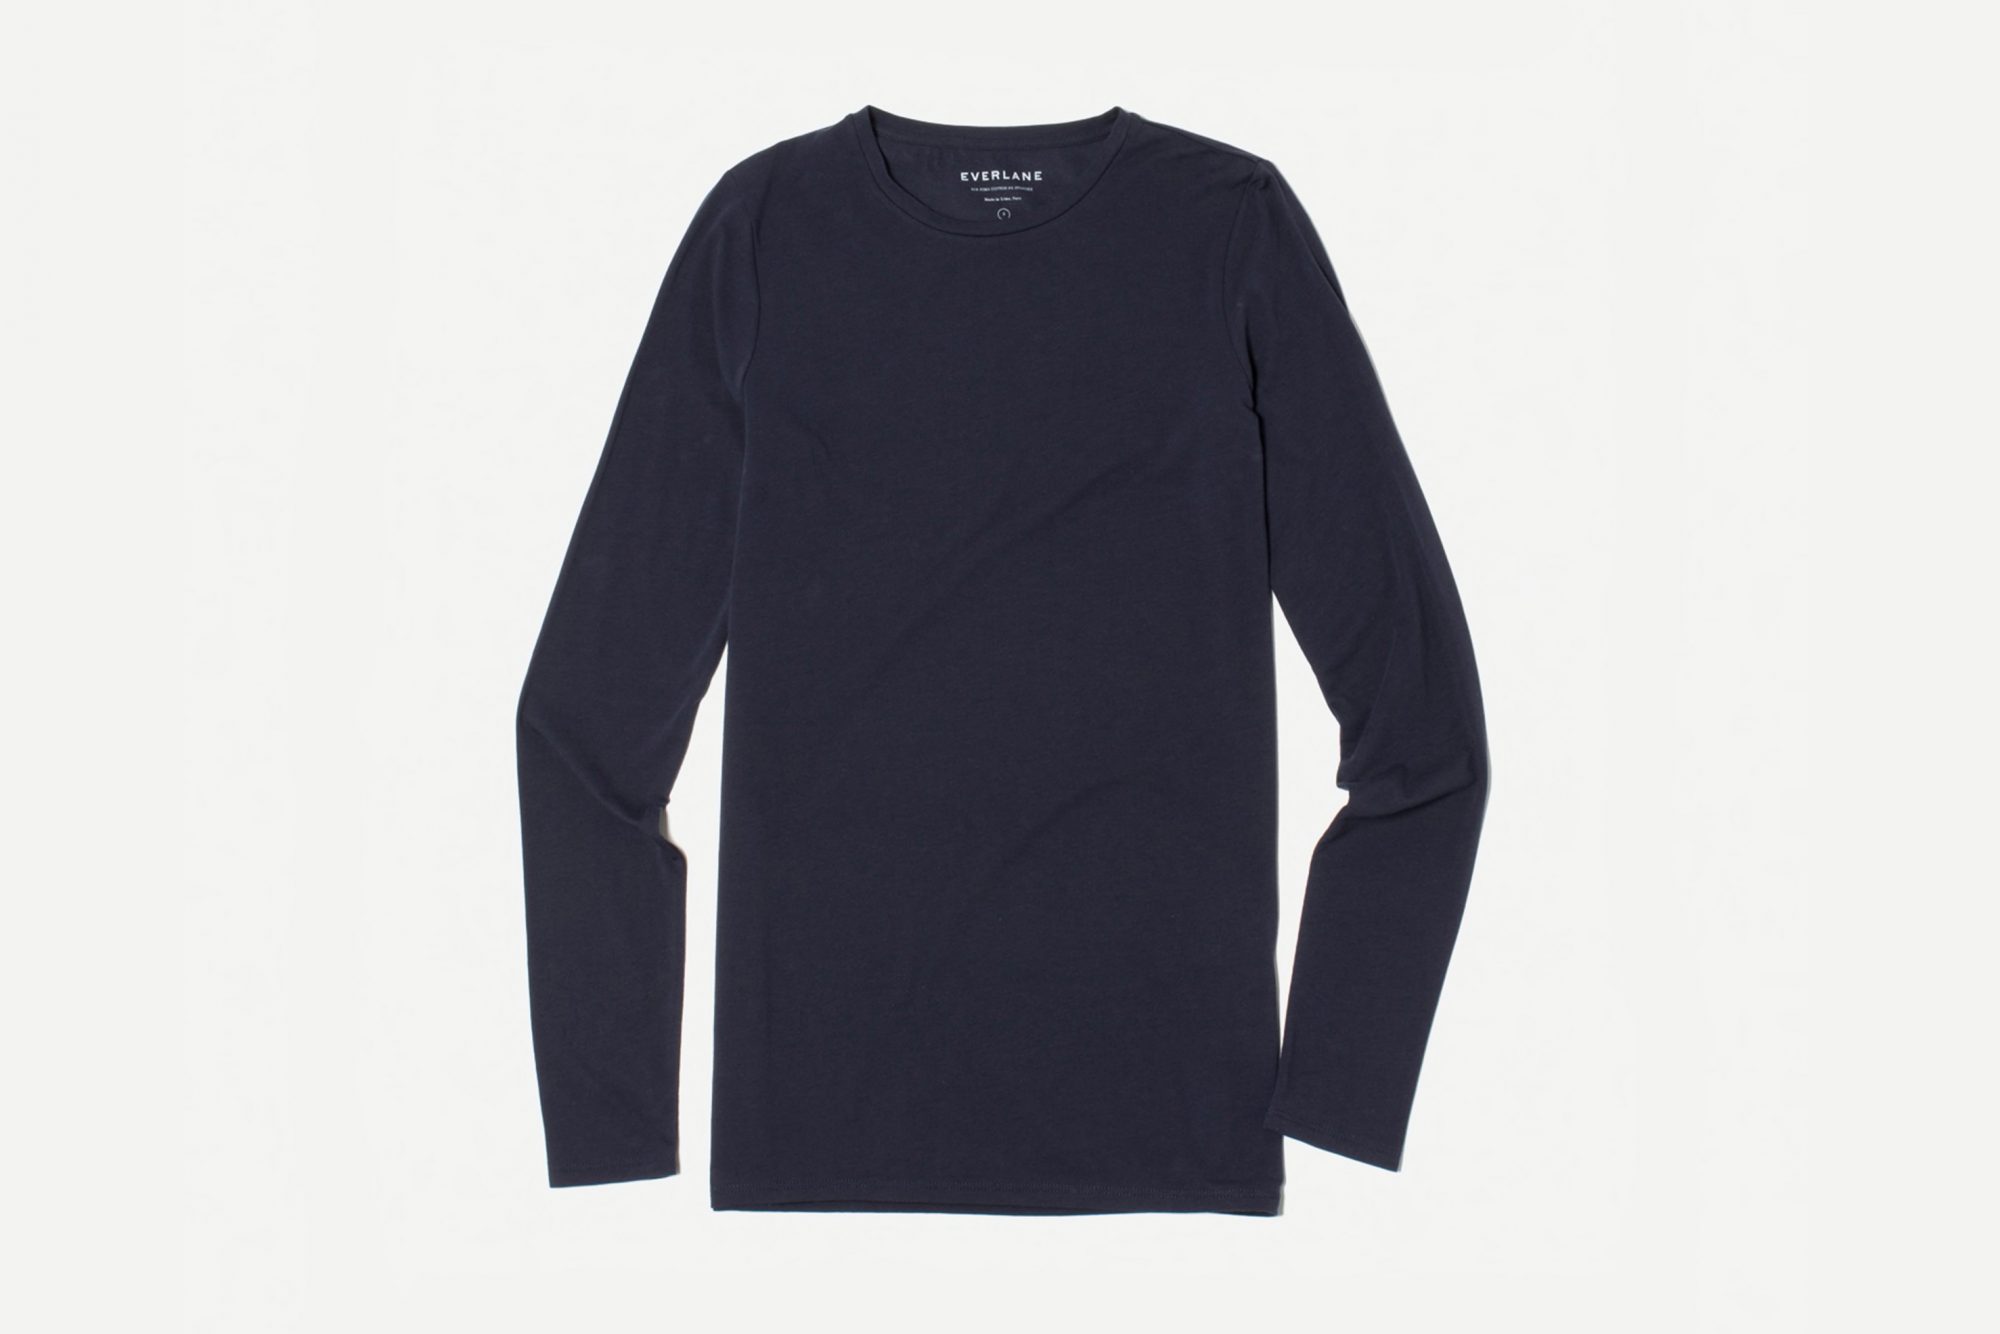 everlane choose what you pay sale prima long sleeve